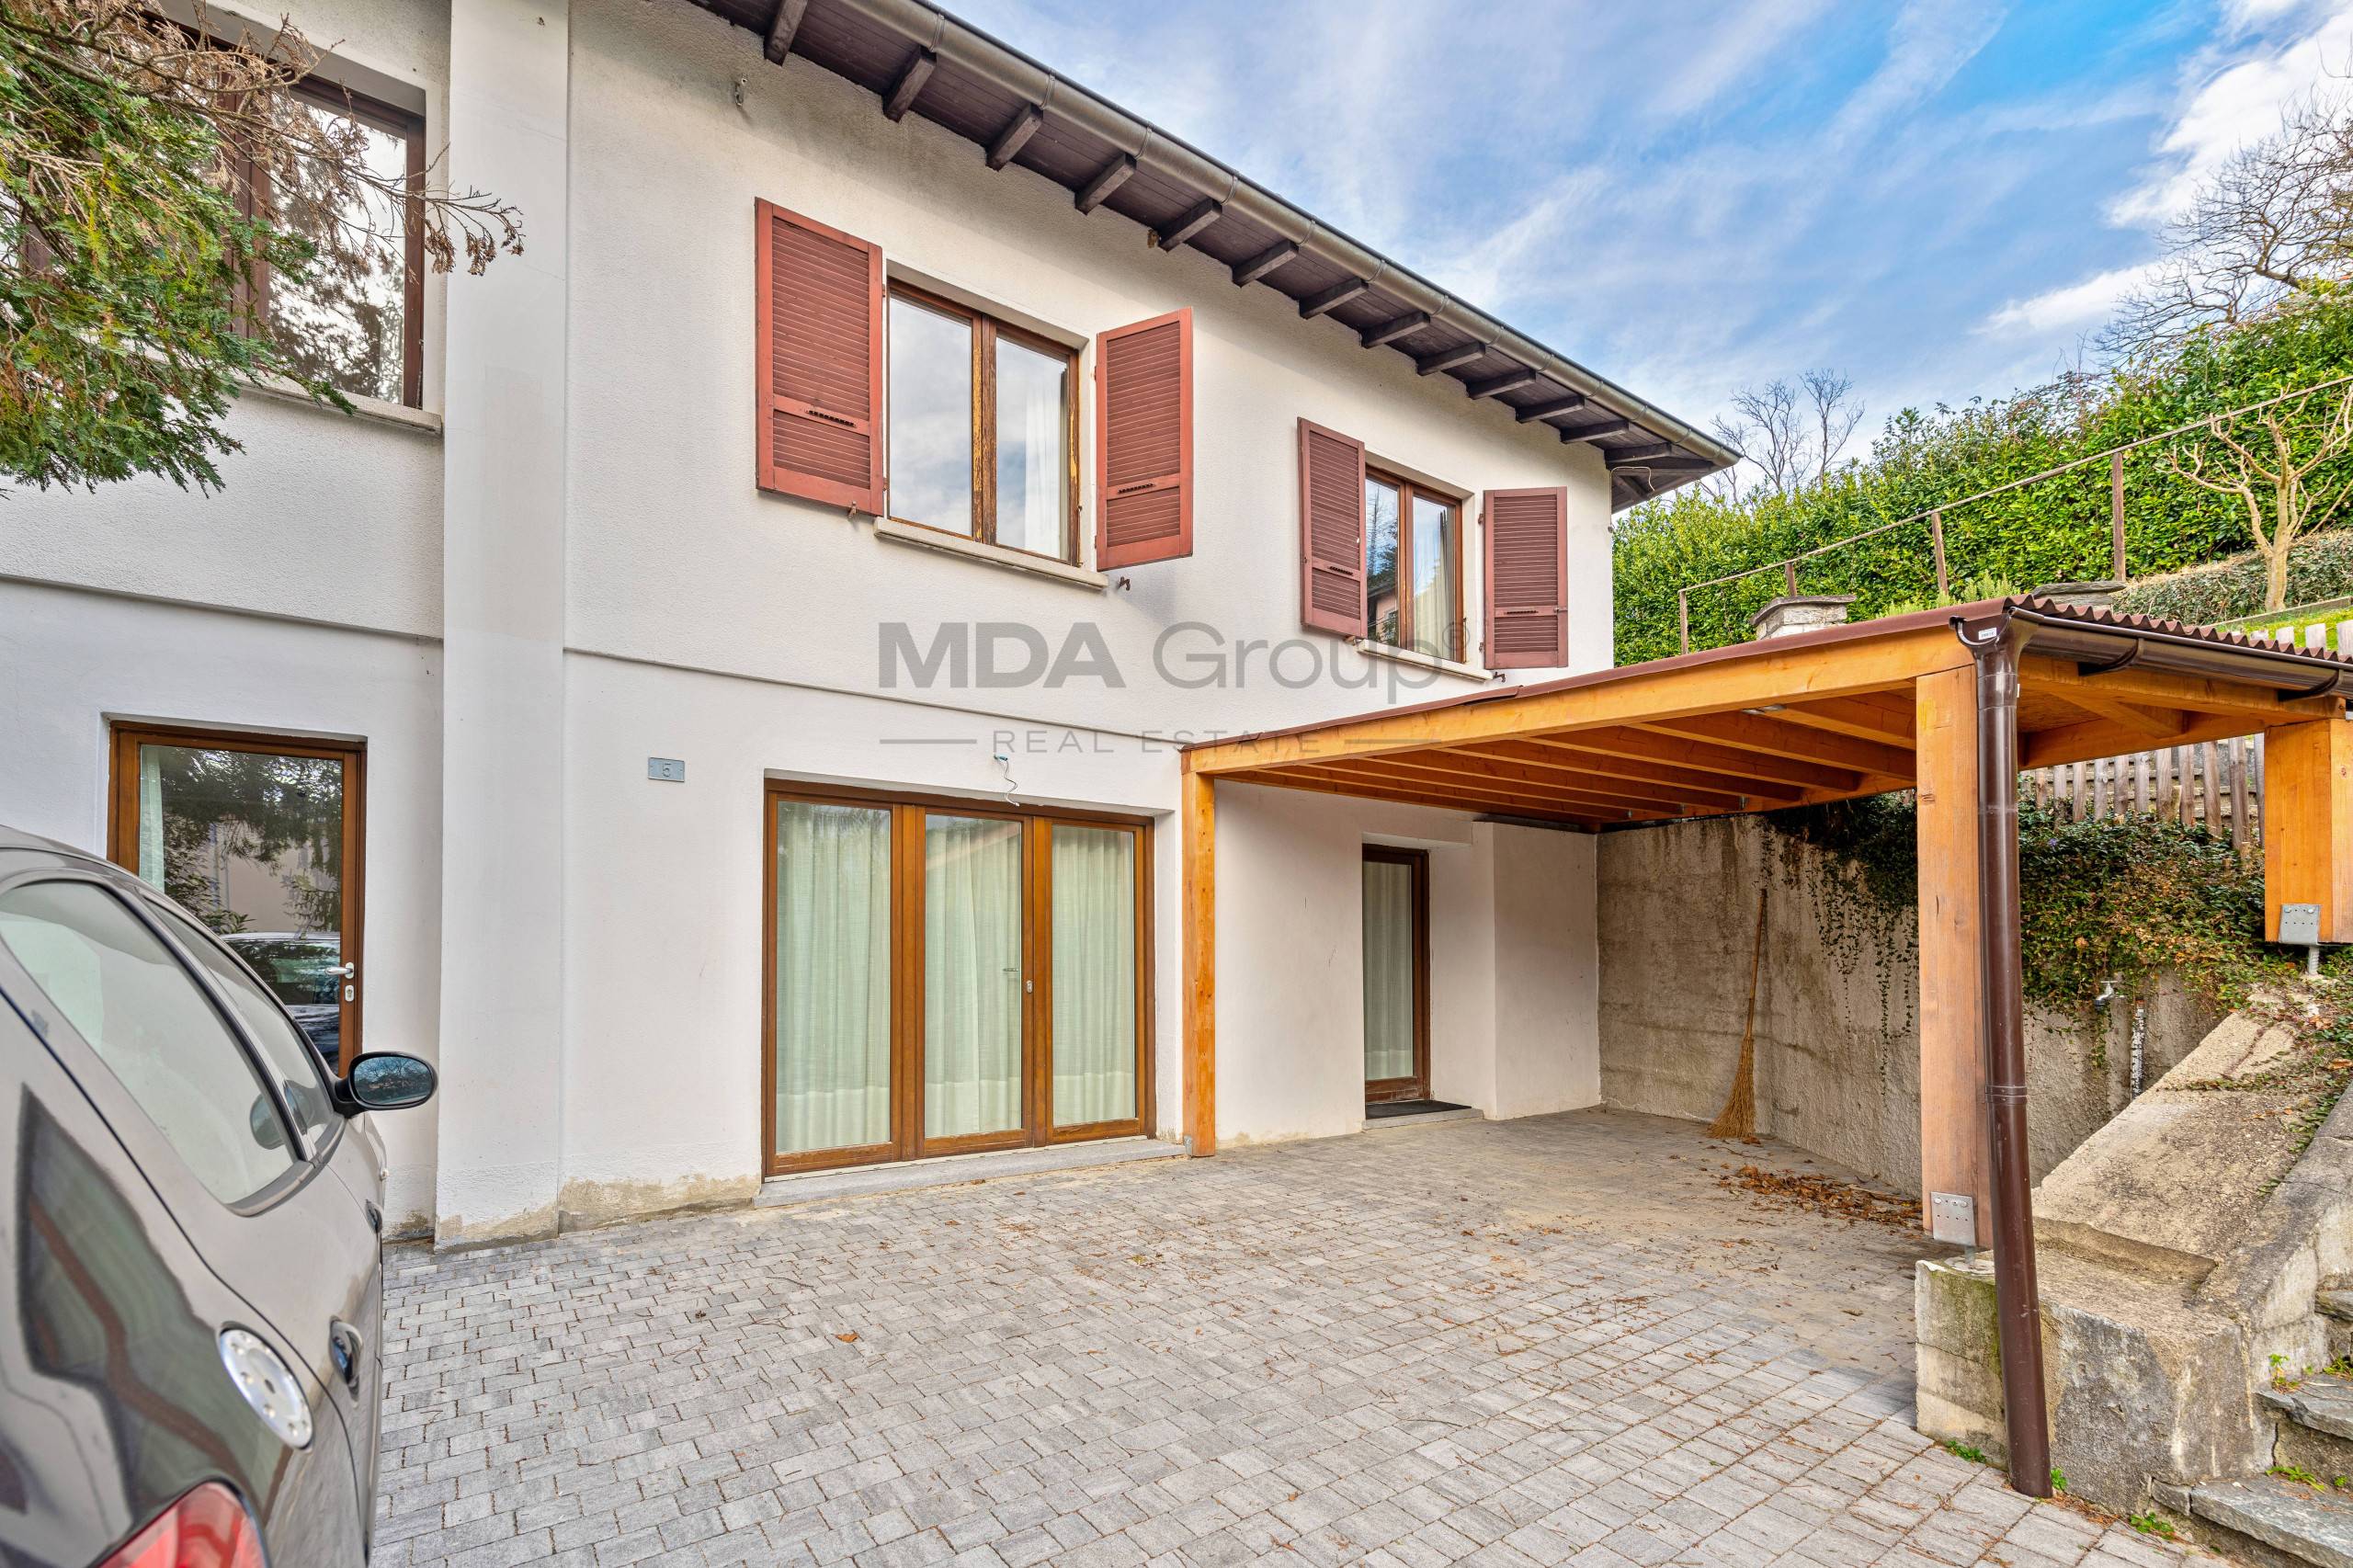 Single house for sale in Vezia